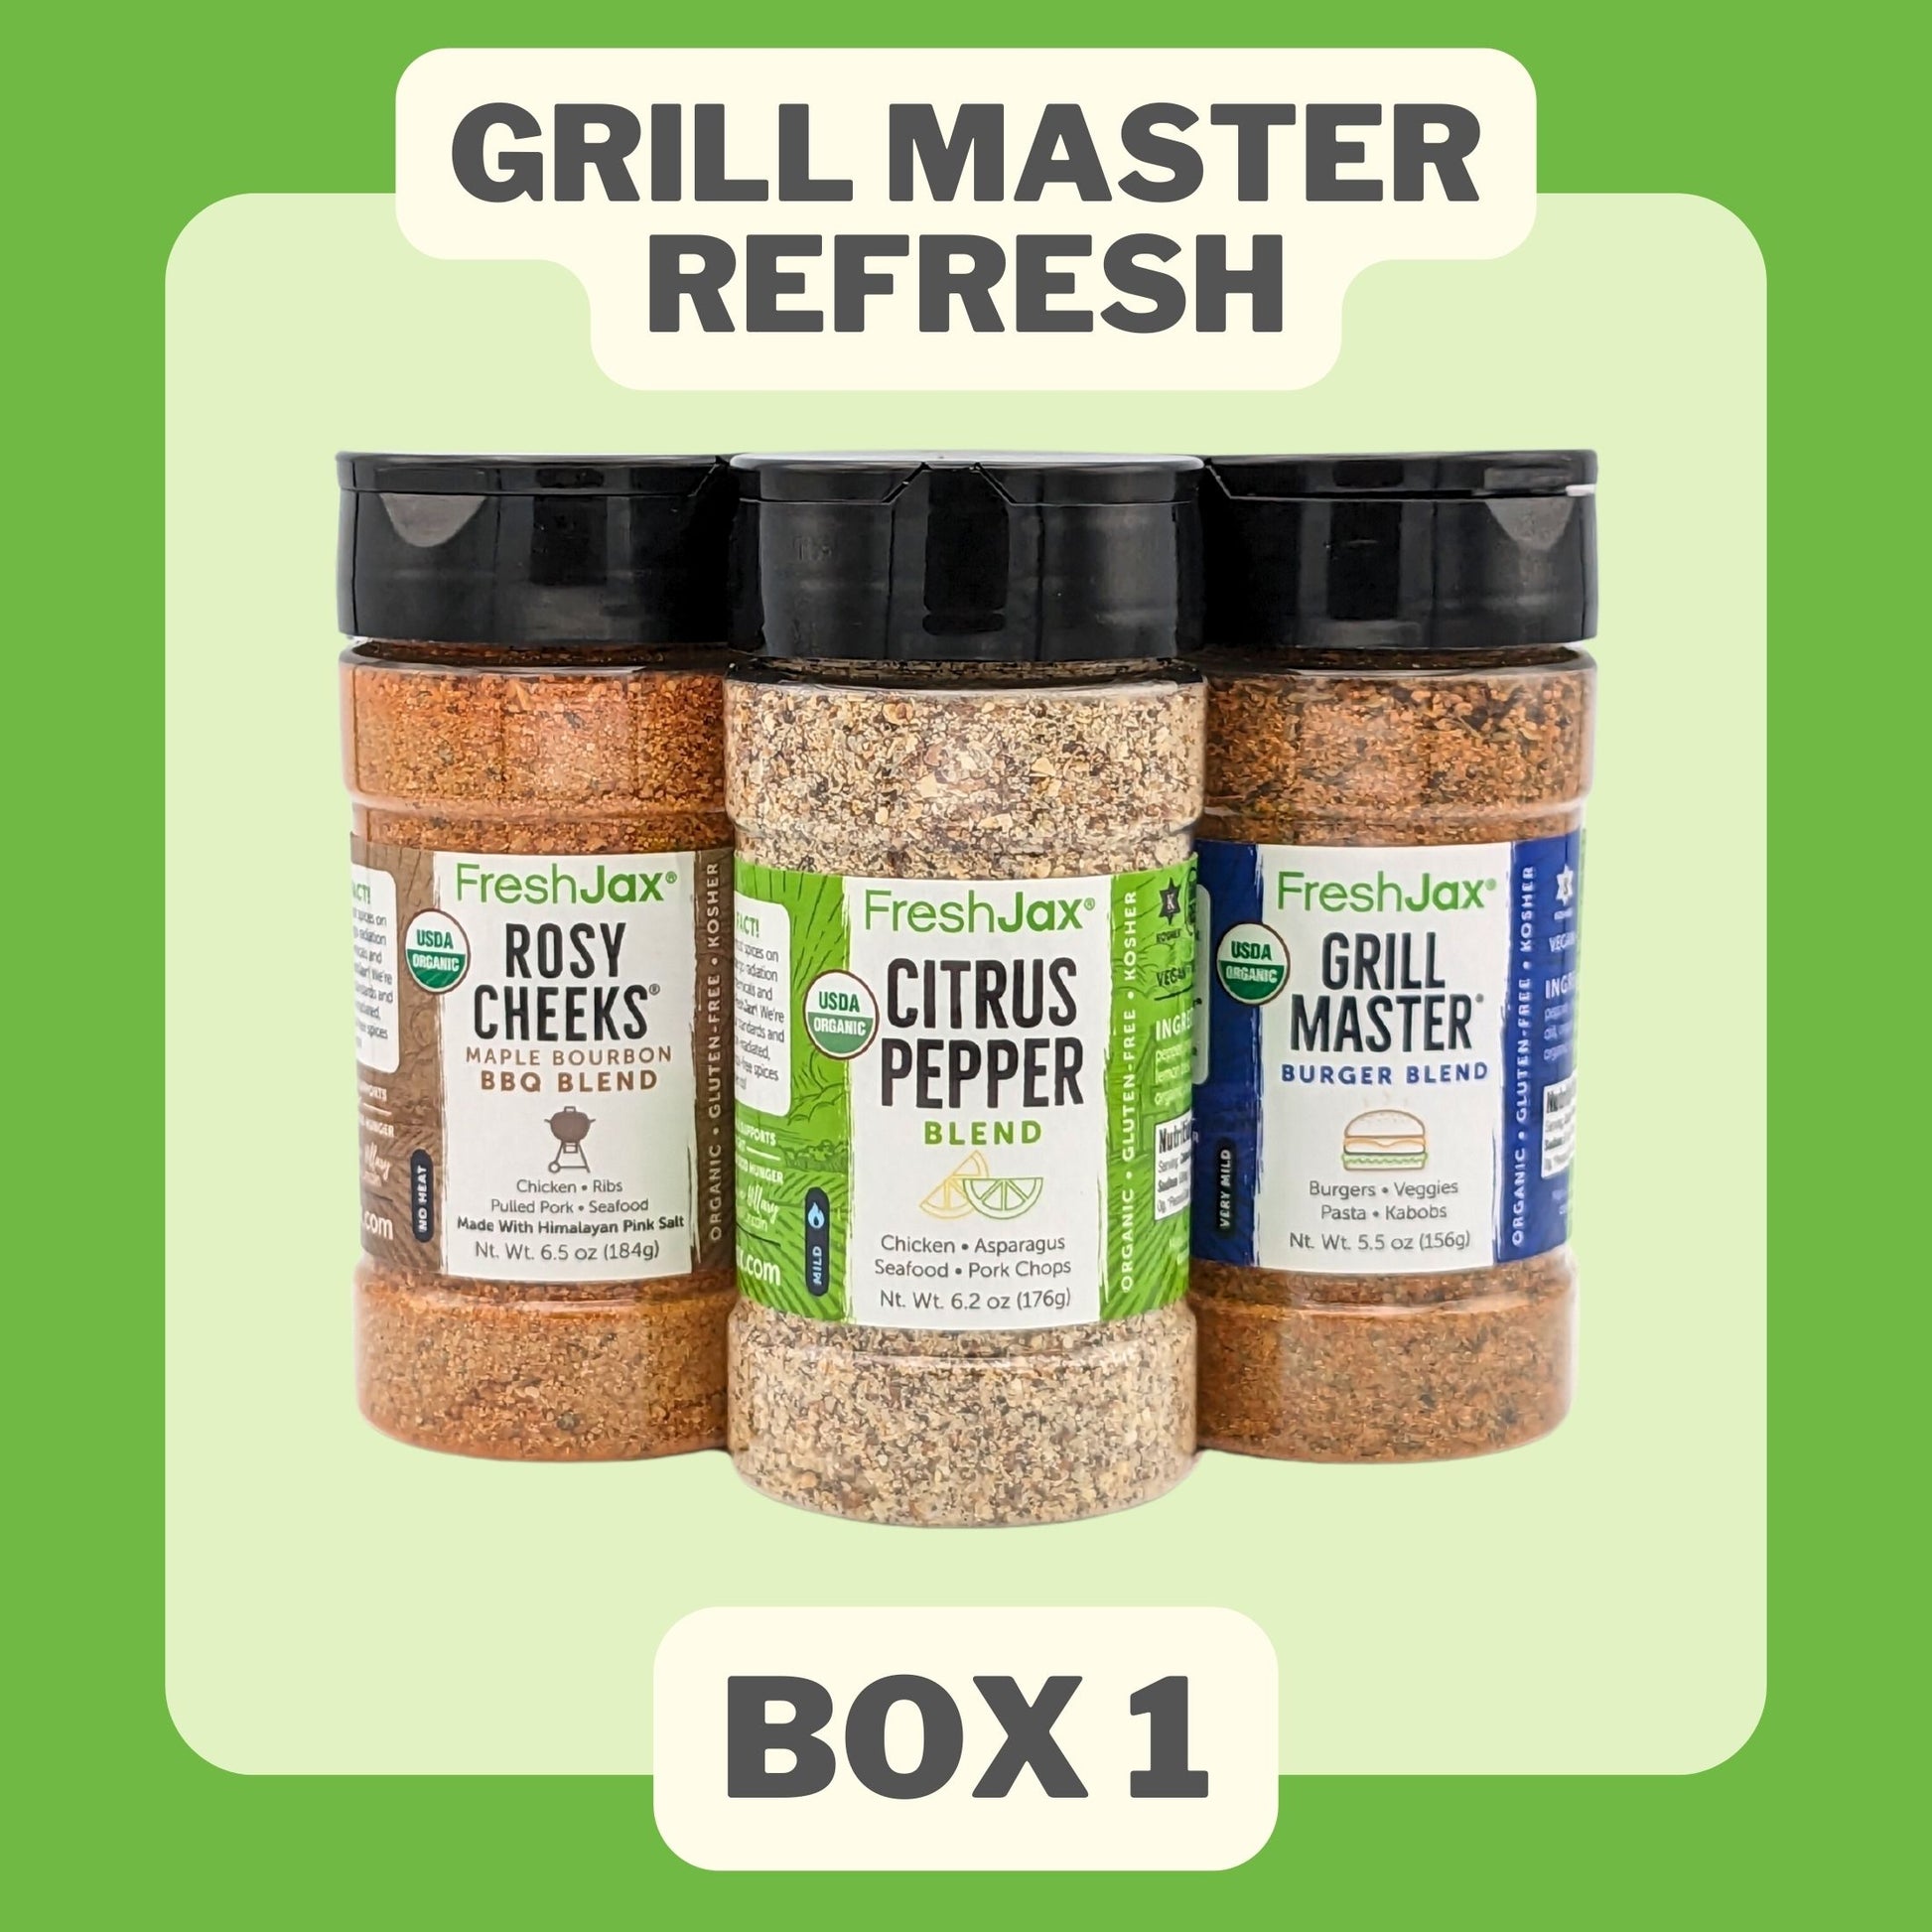 Flavors in the First Grill master ReFresh : Rosy Cheeks, Citrus Pepper, Grill Master Burger Blend